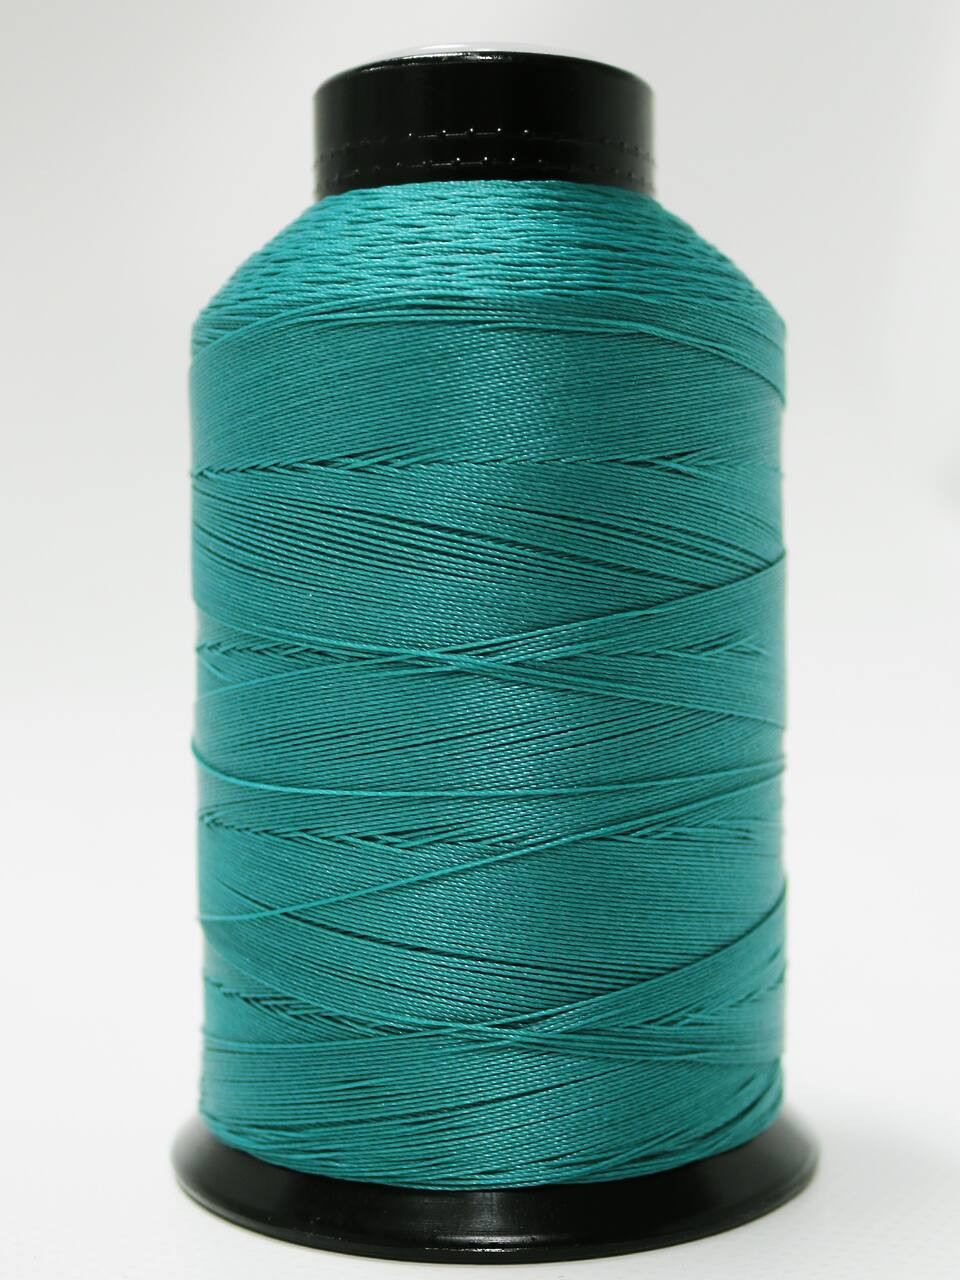 Automotive Upholstery Sewing Thread for Leather Vinyl Material Marine UV Nylon 